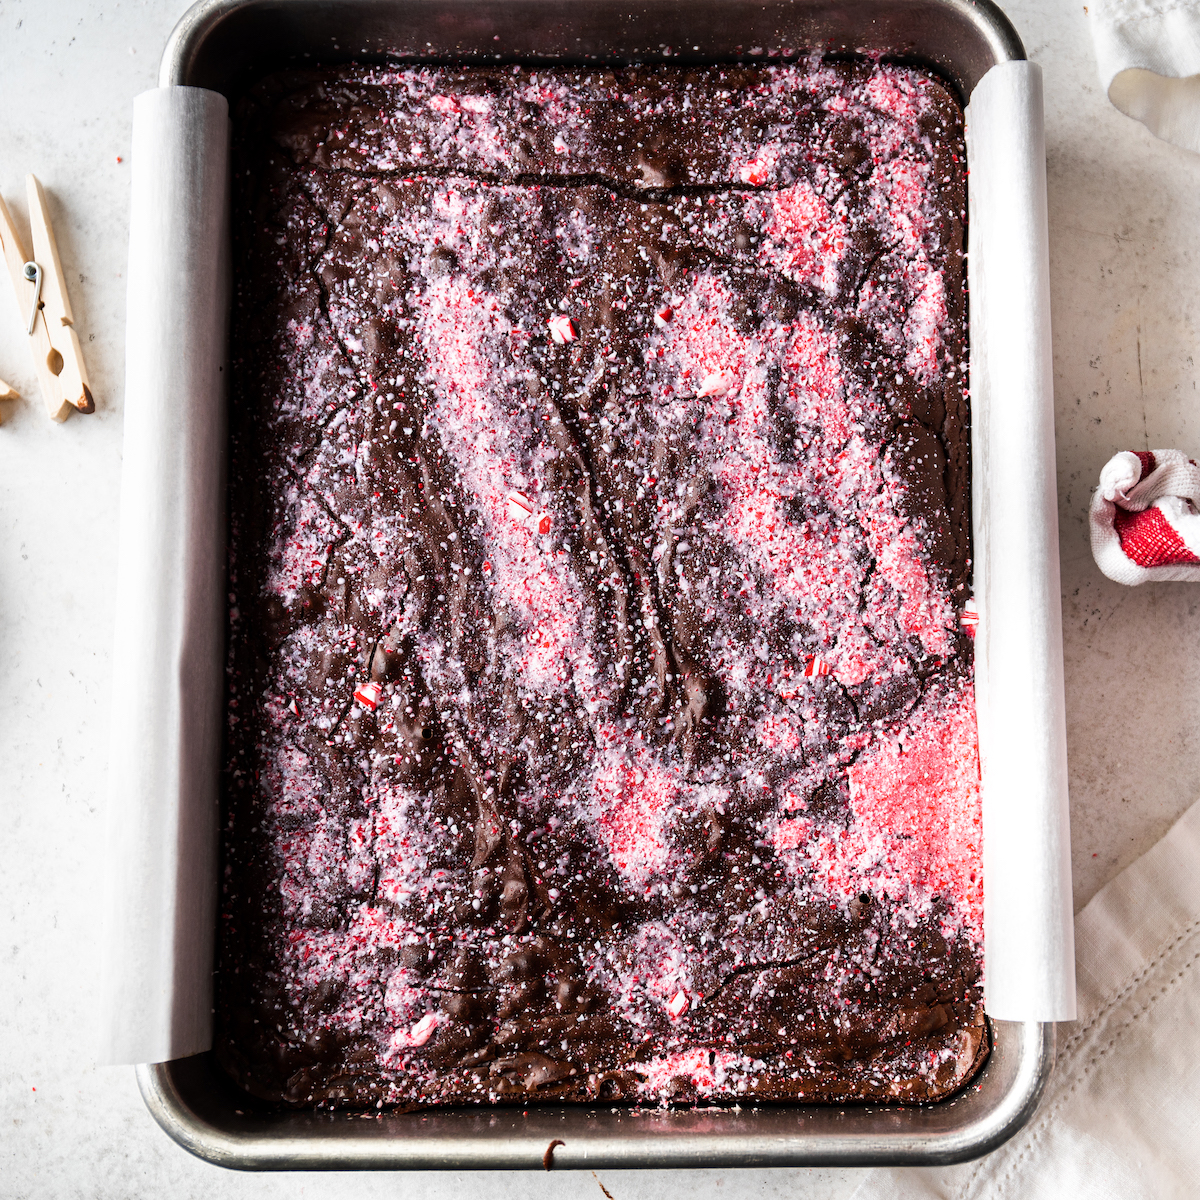 Peppermint Brownies fresh from the oven.